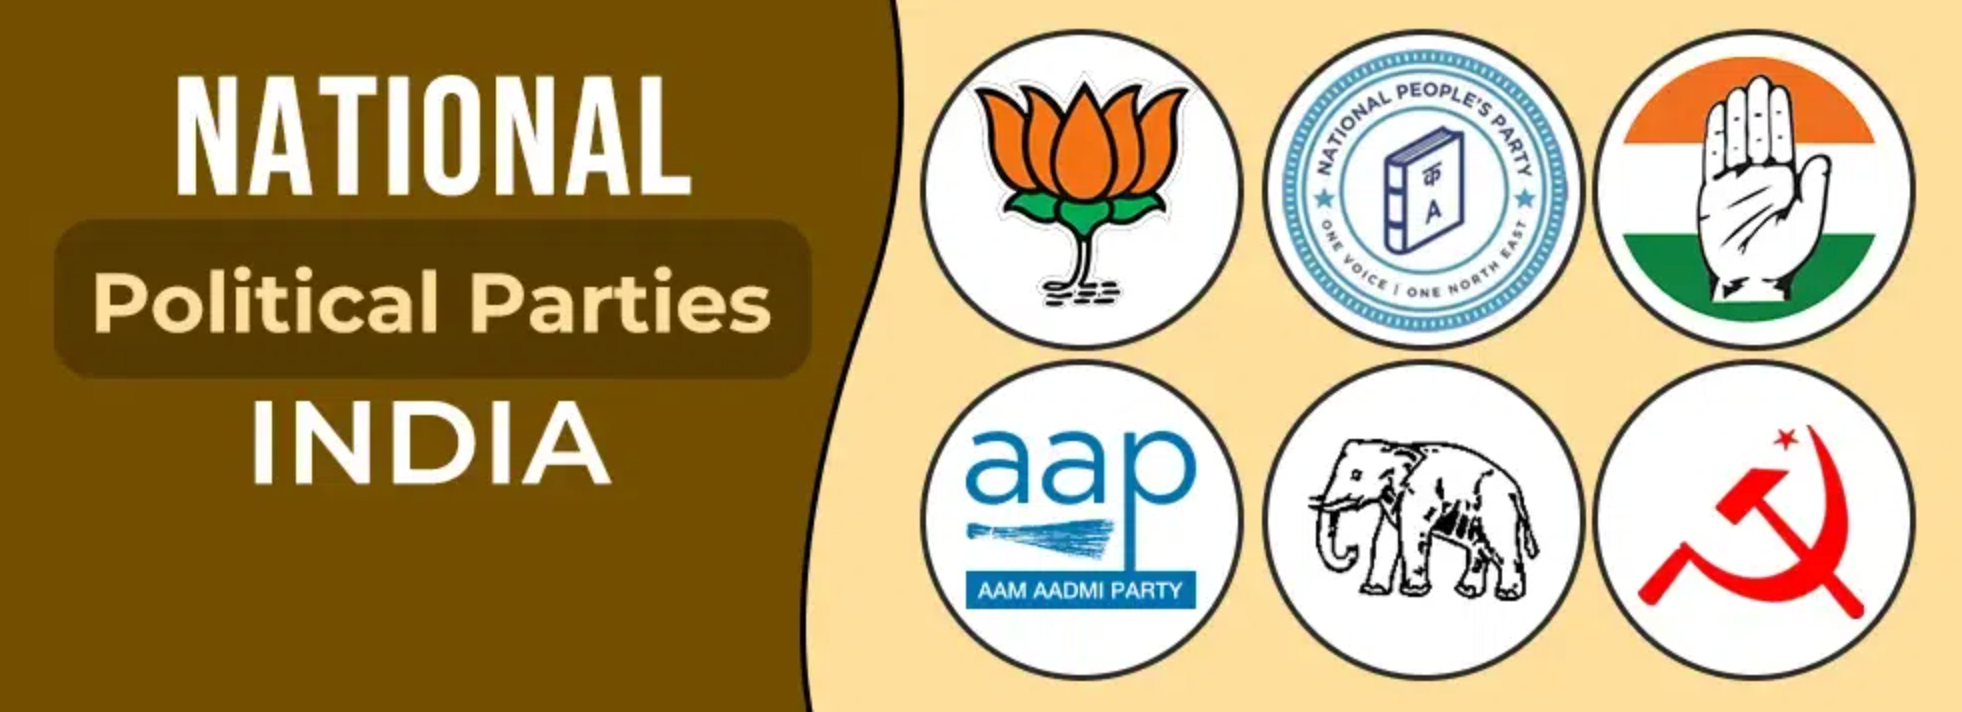 6 National Parties in India